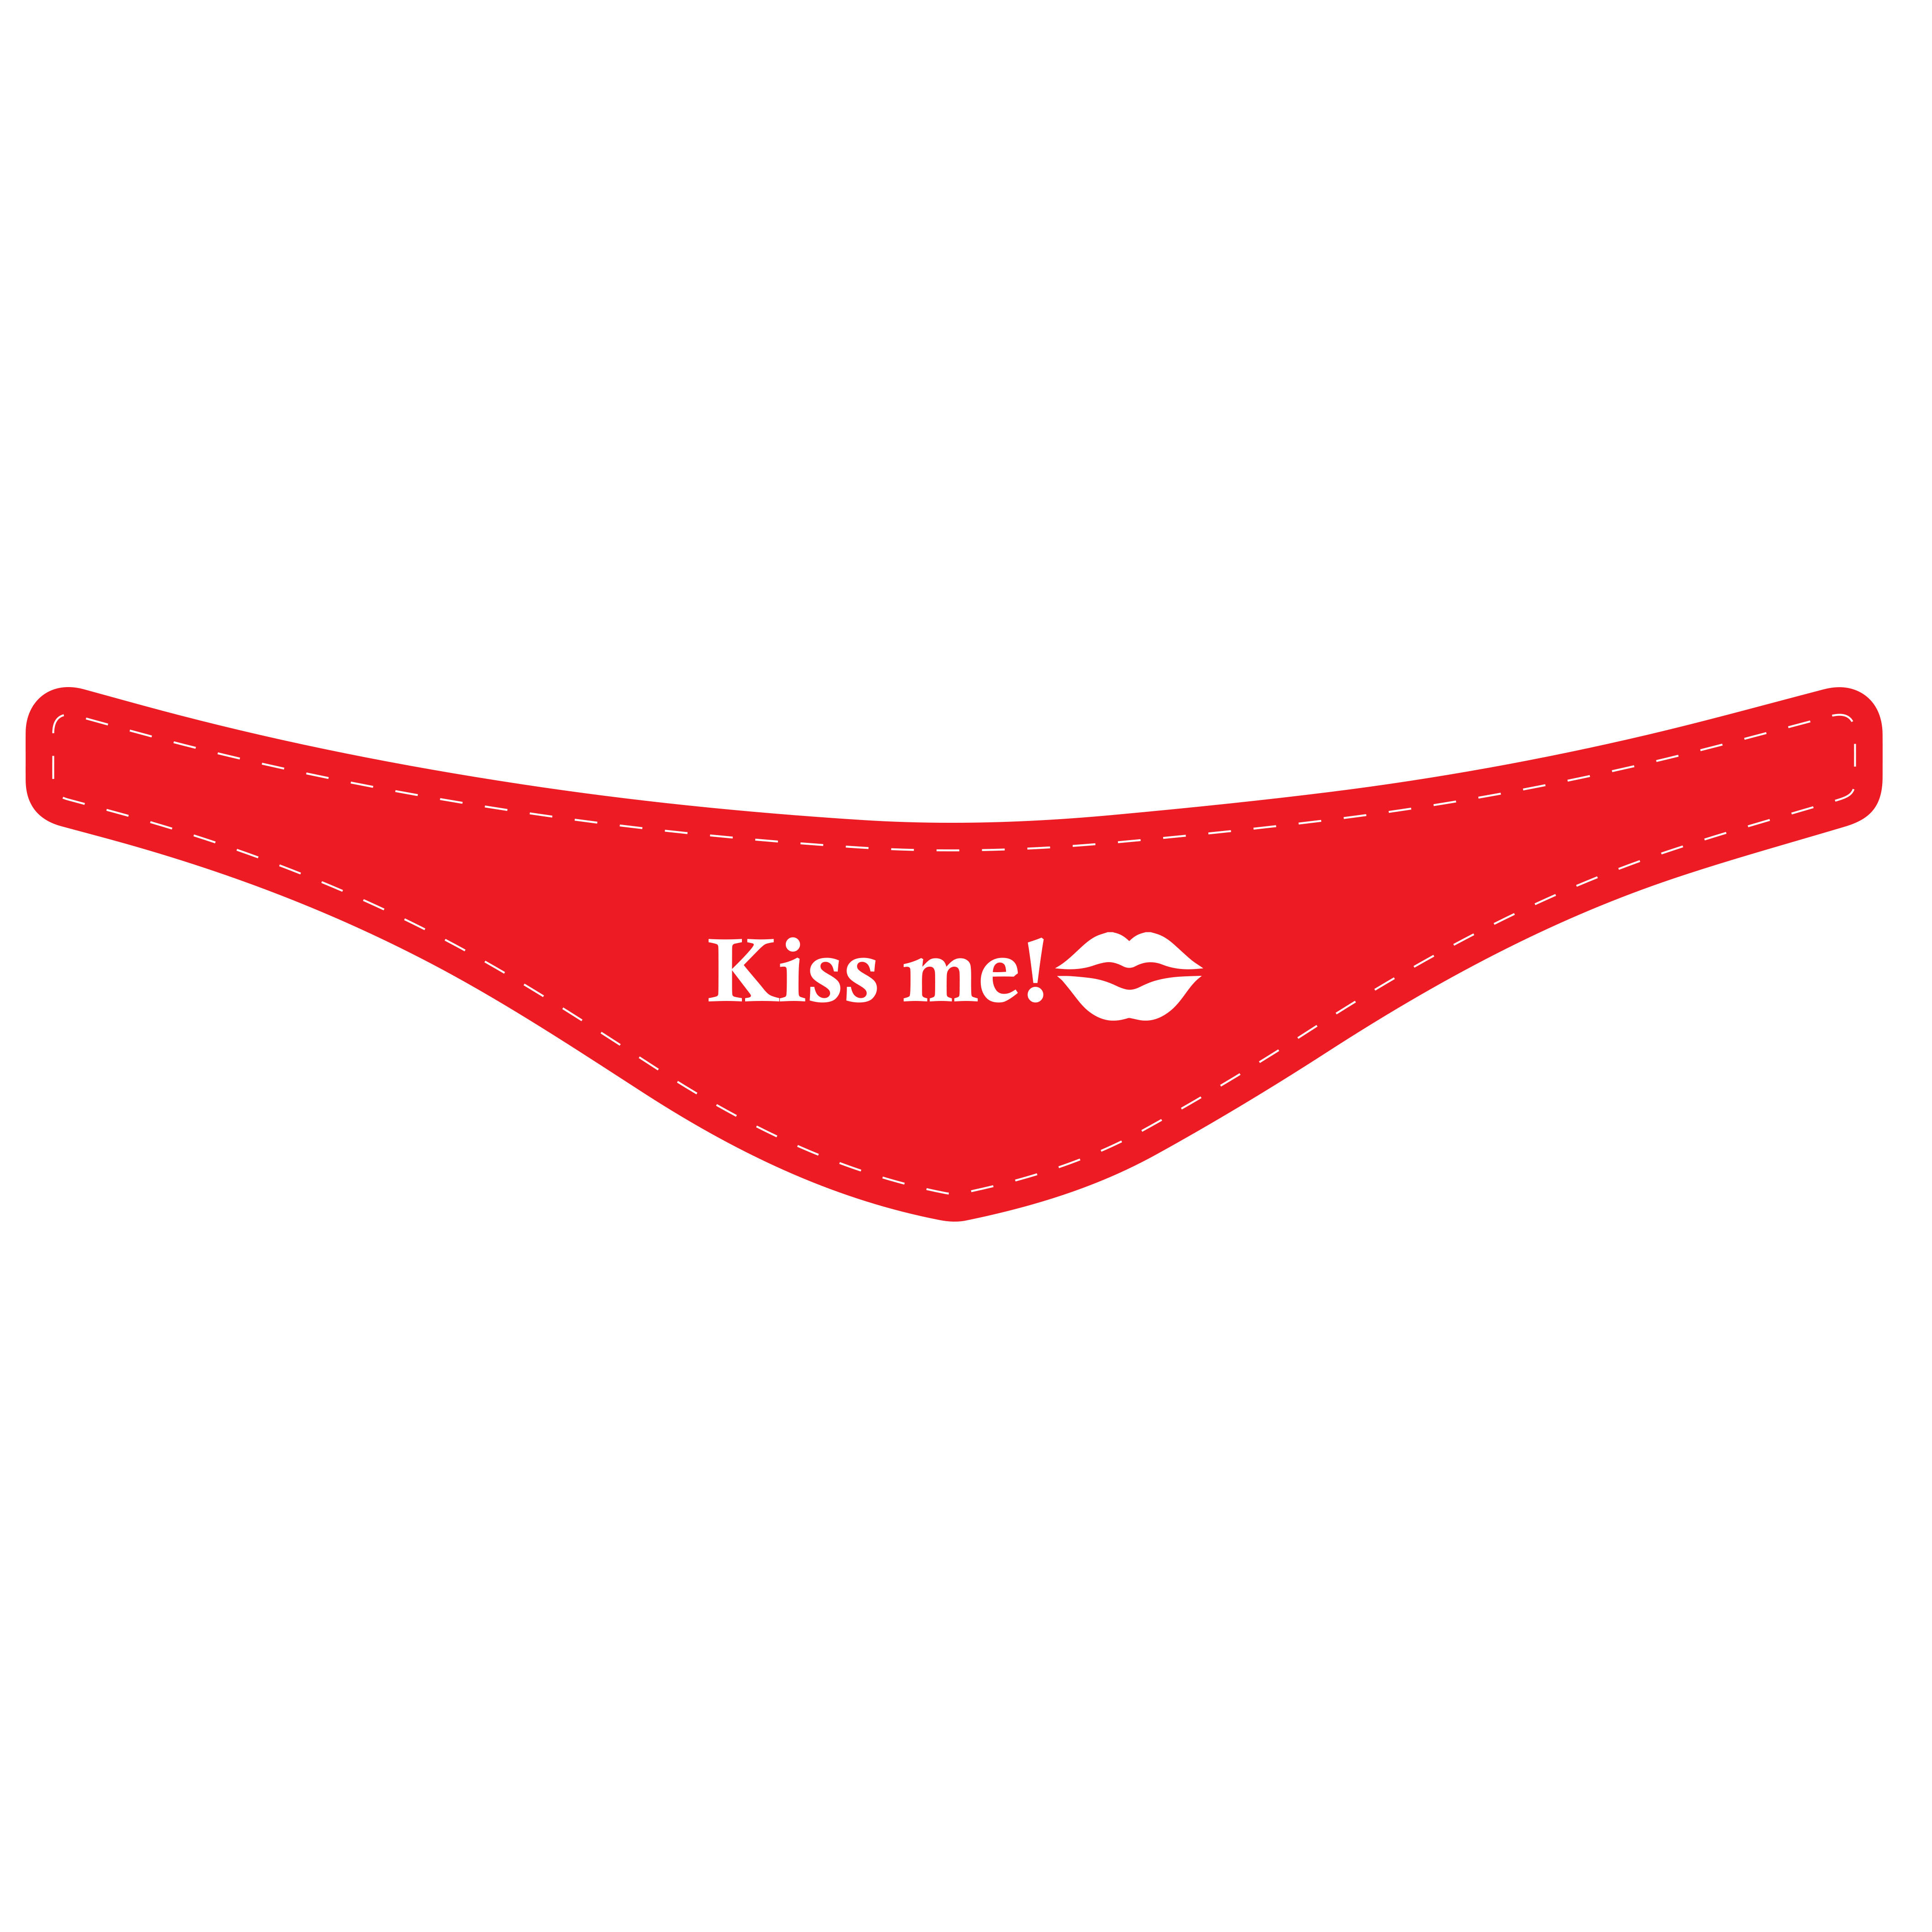 X the scarf for plush Kiss me!